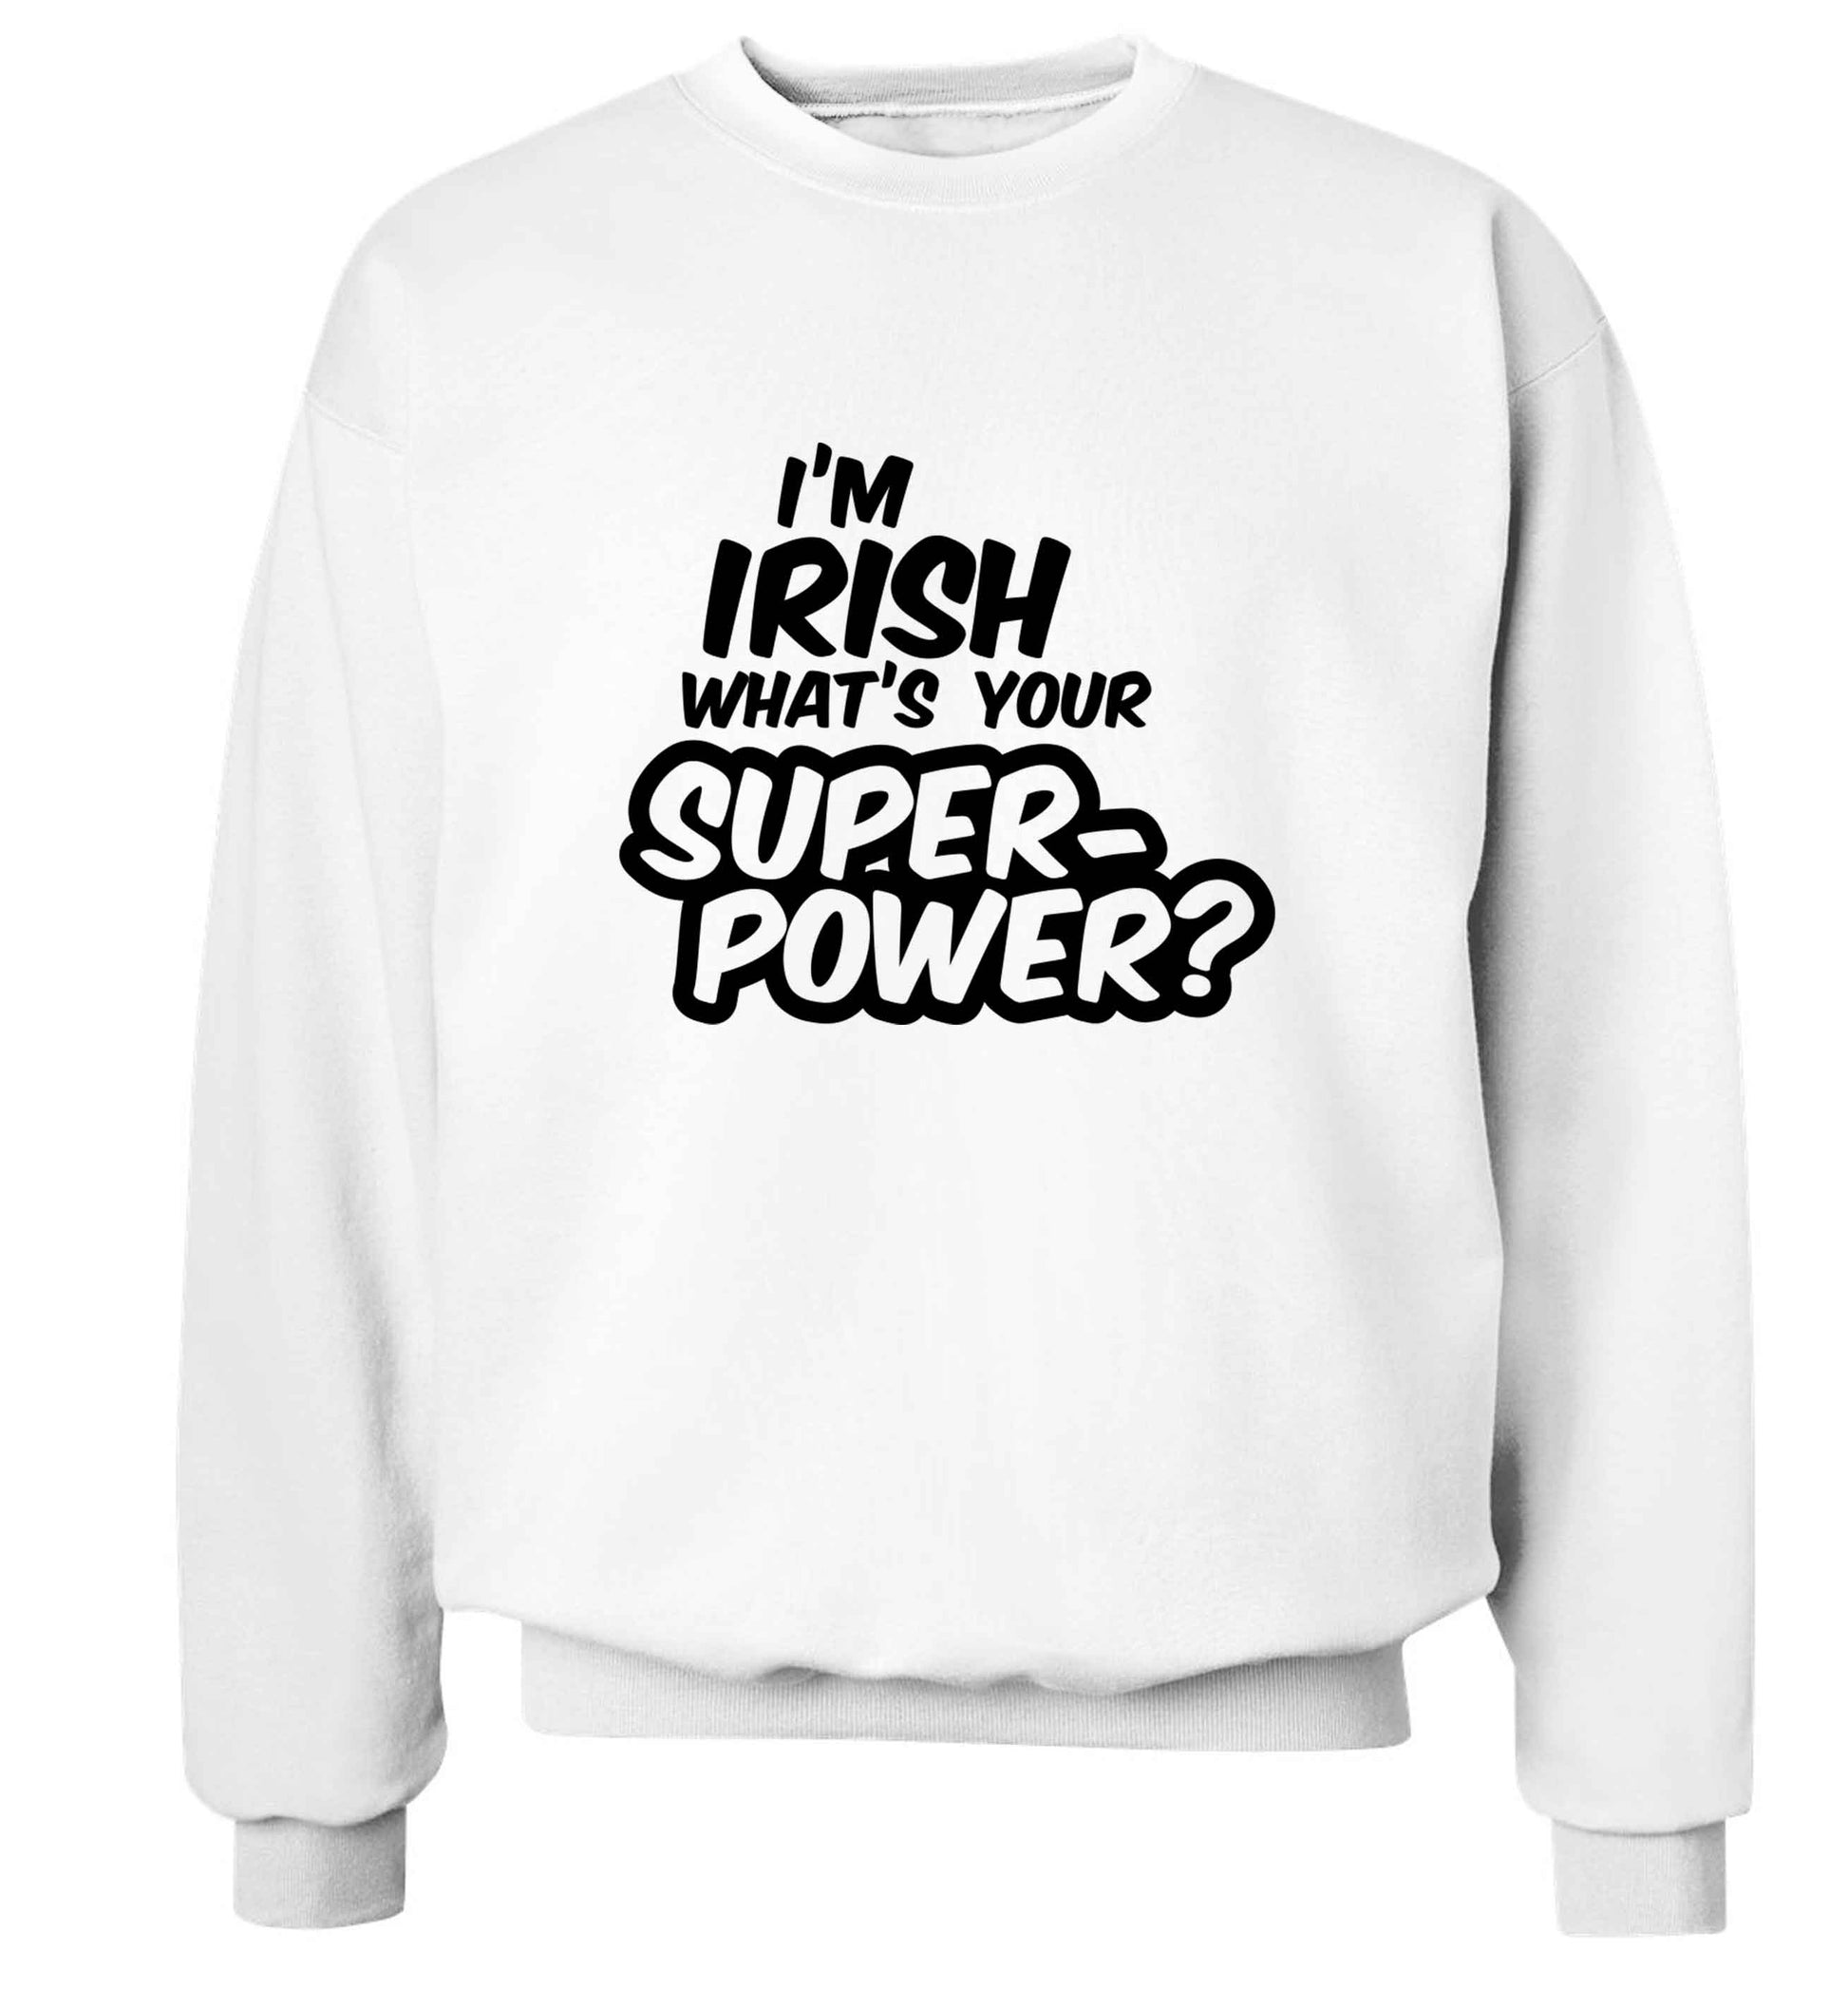 I'm Irish what's your superpower? adult's unisex white sweater 2XL